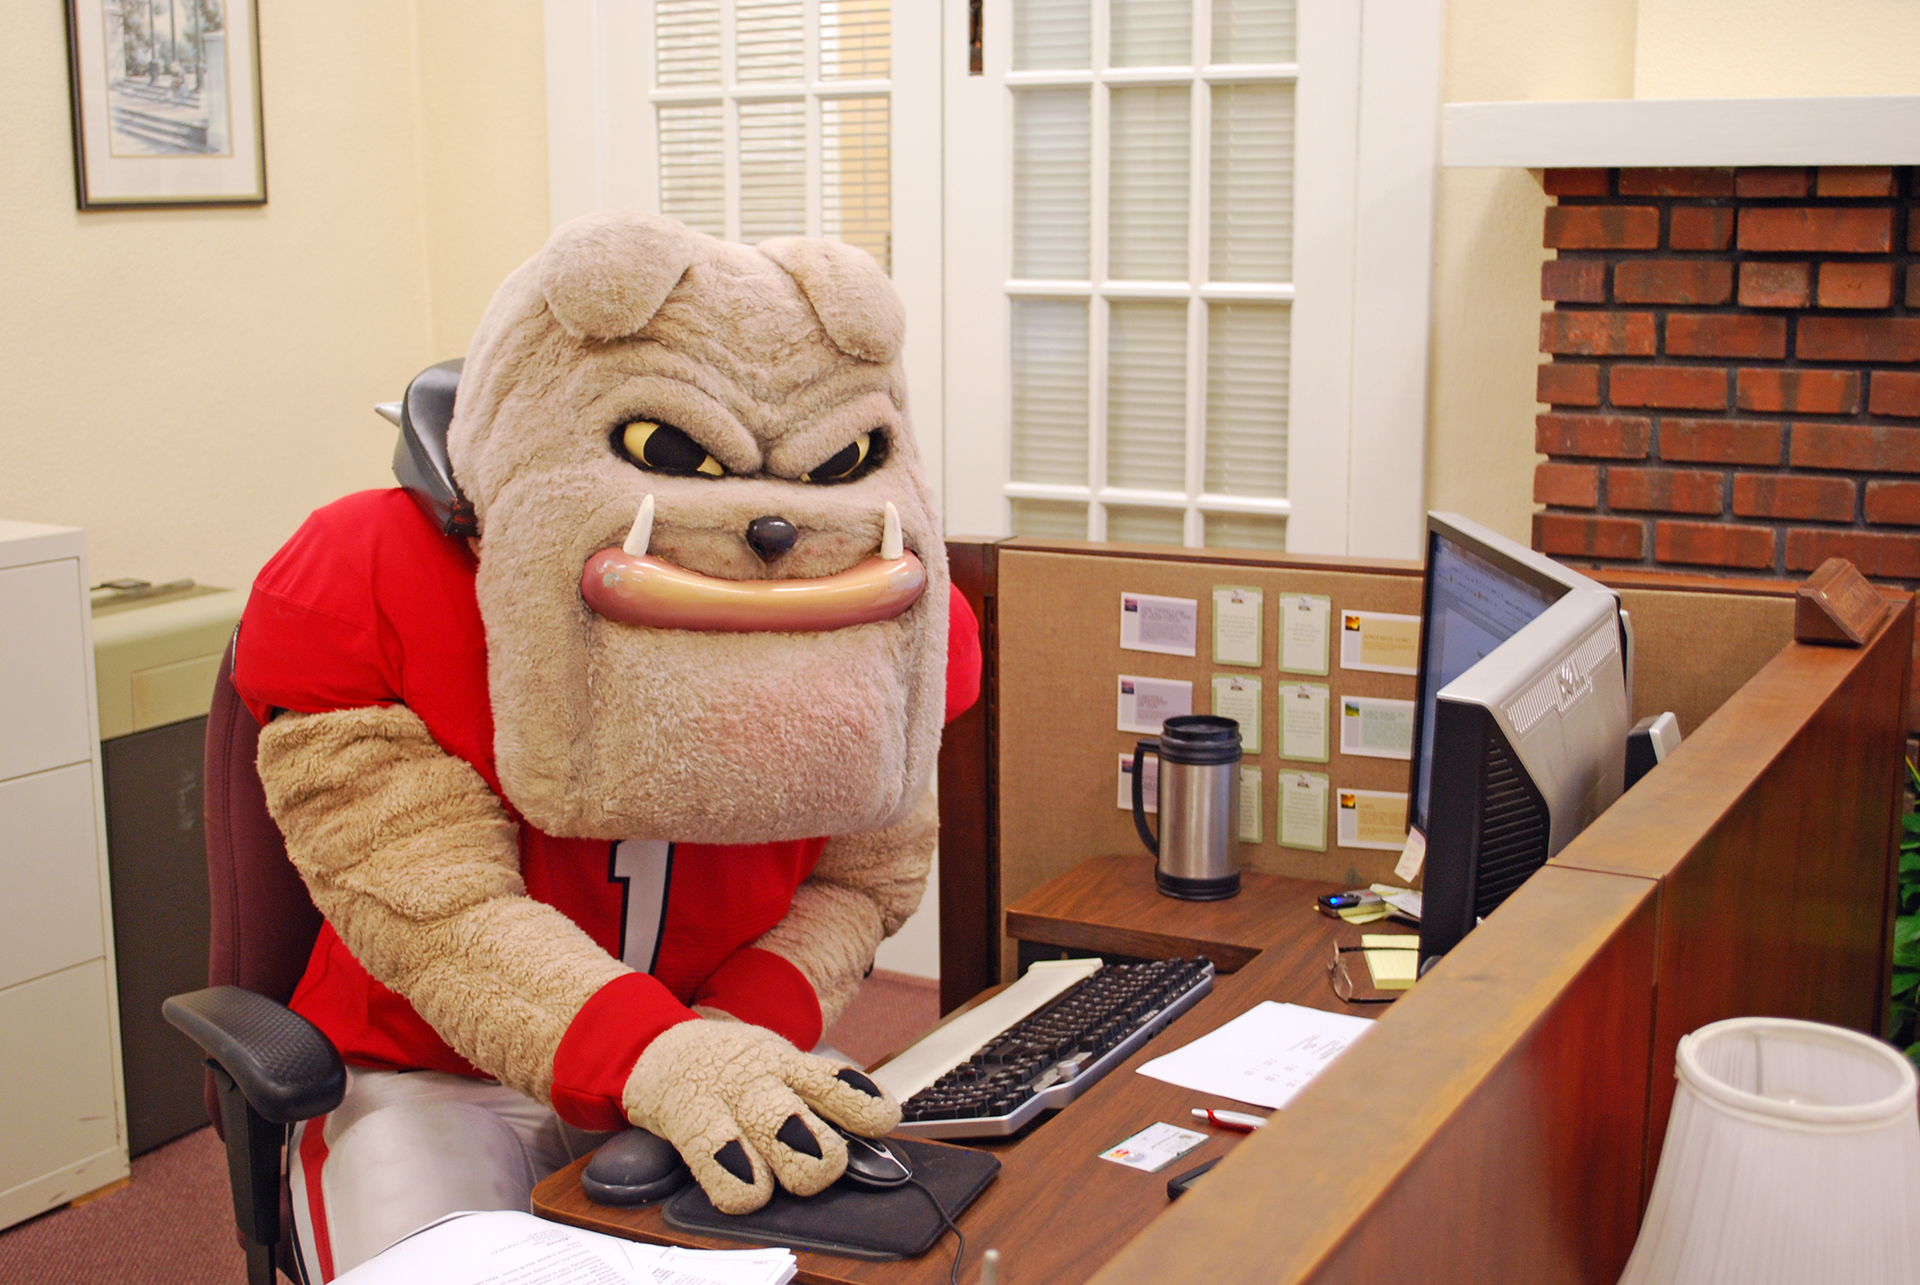 A photograph of Hairy Dawg sitting at a desk with a computer.